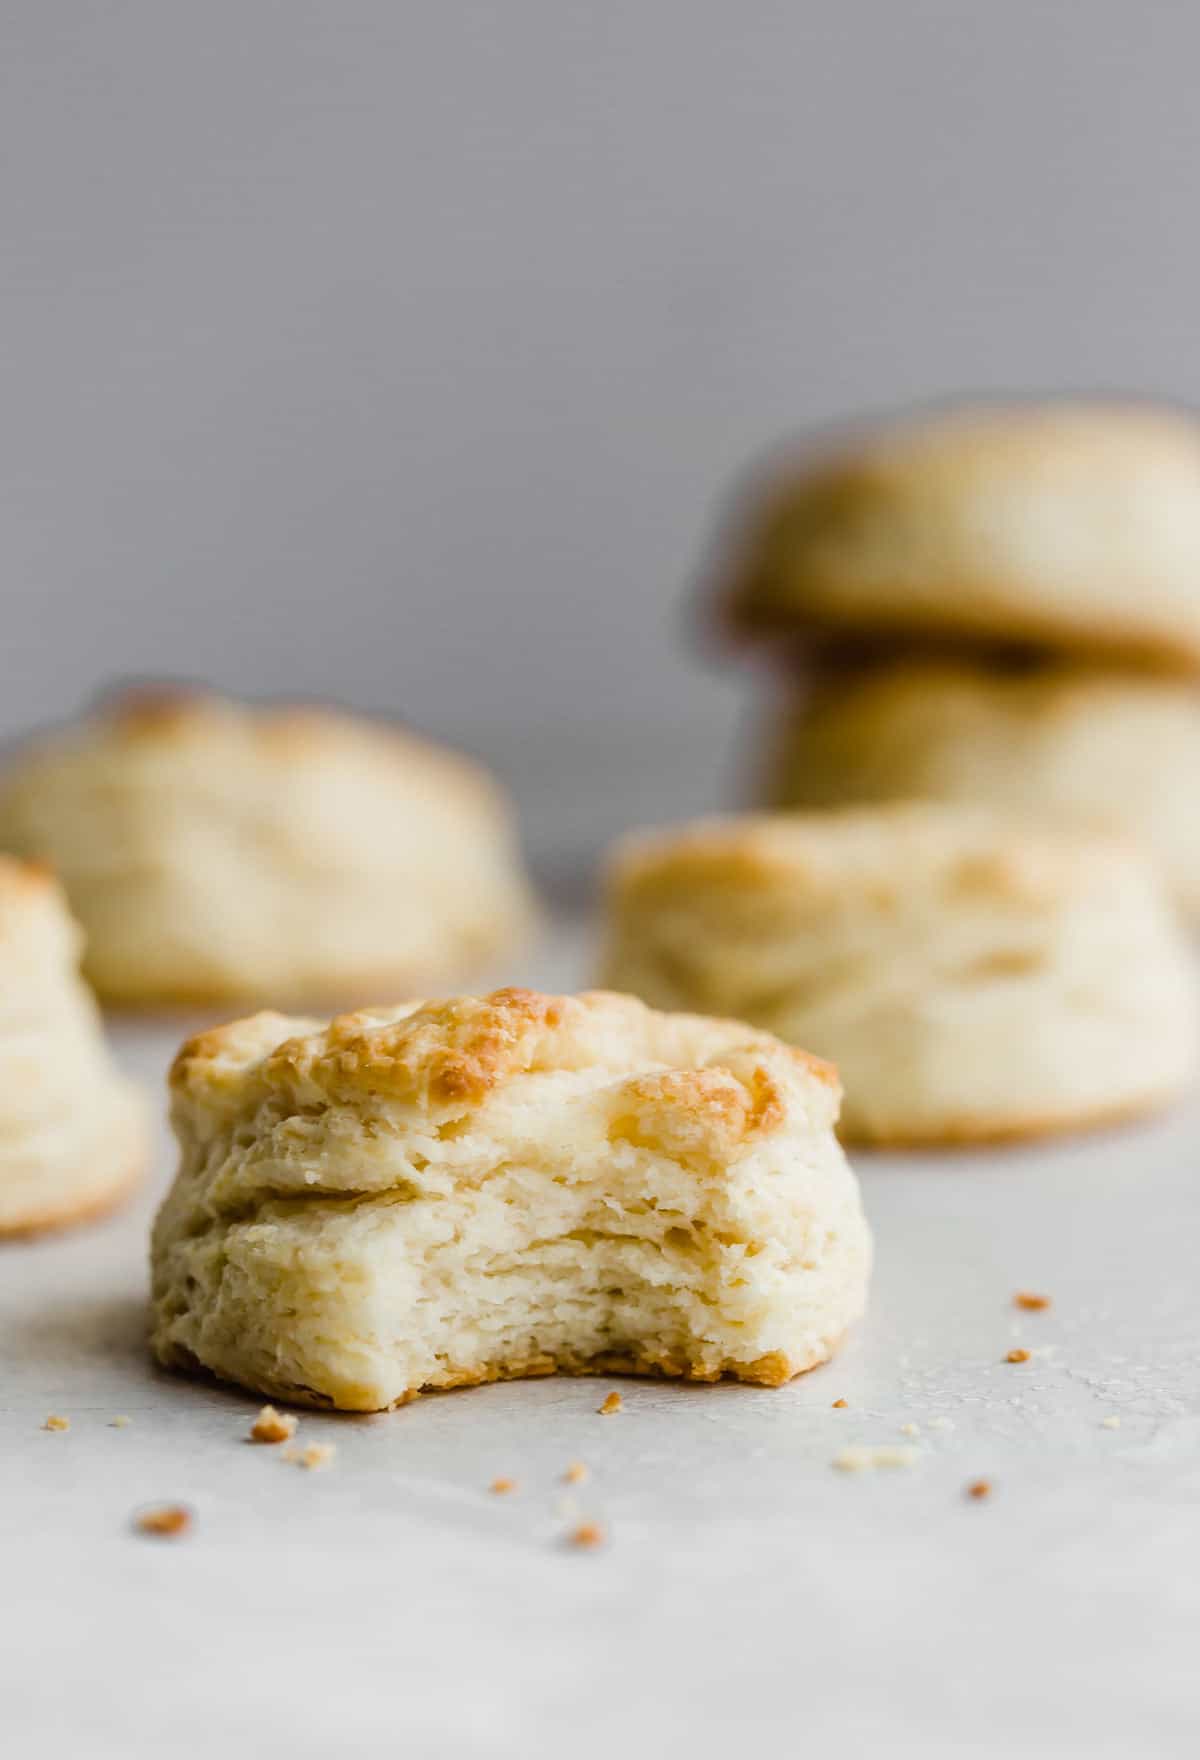 A flaky buttermilk biscuit with a bite taken out of it, against a light gray background. 